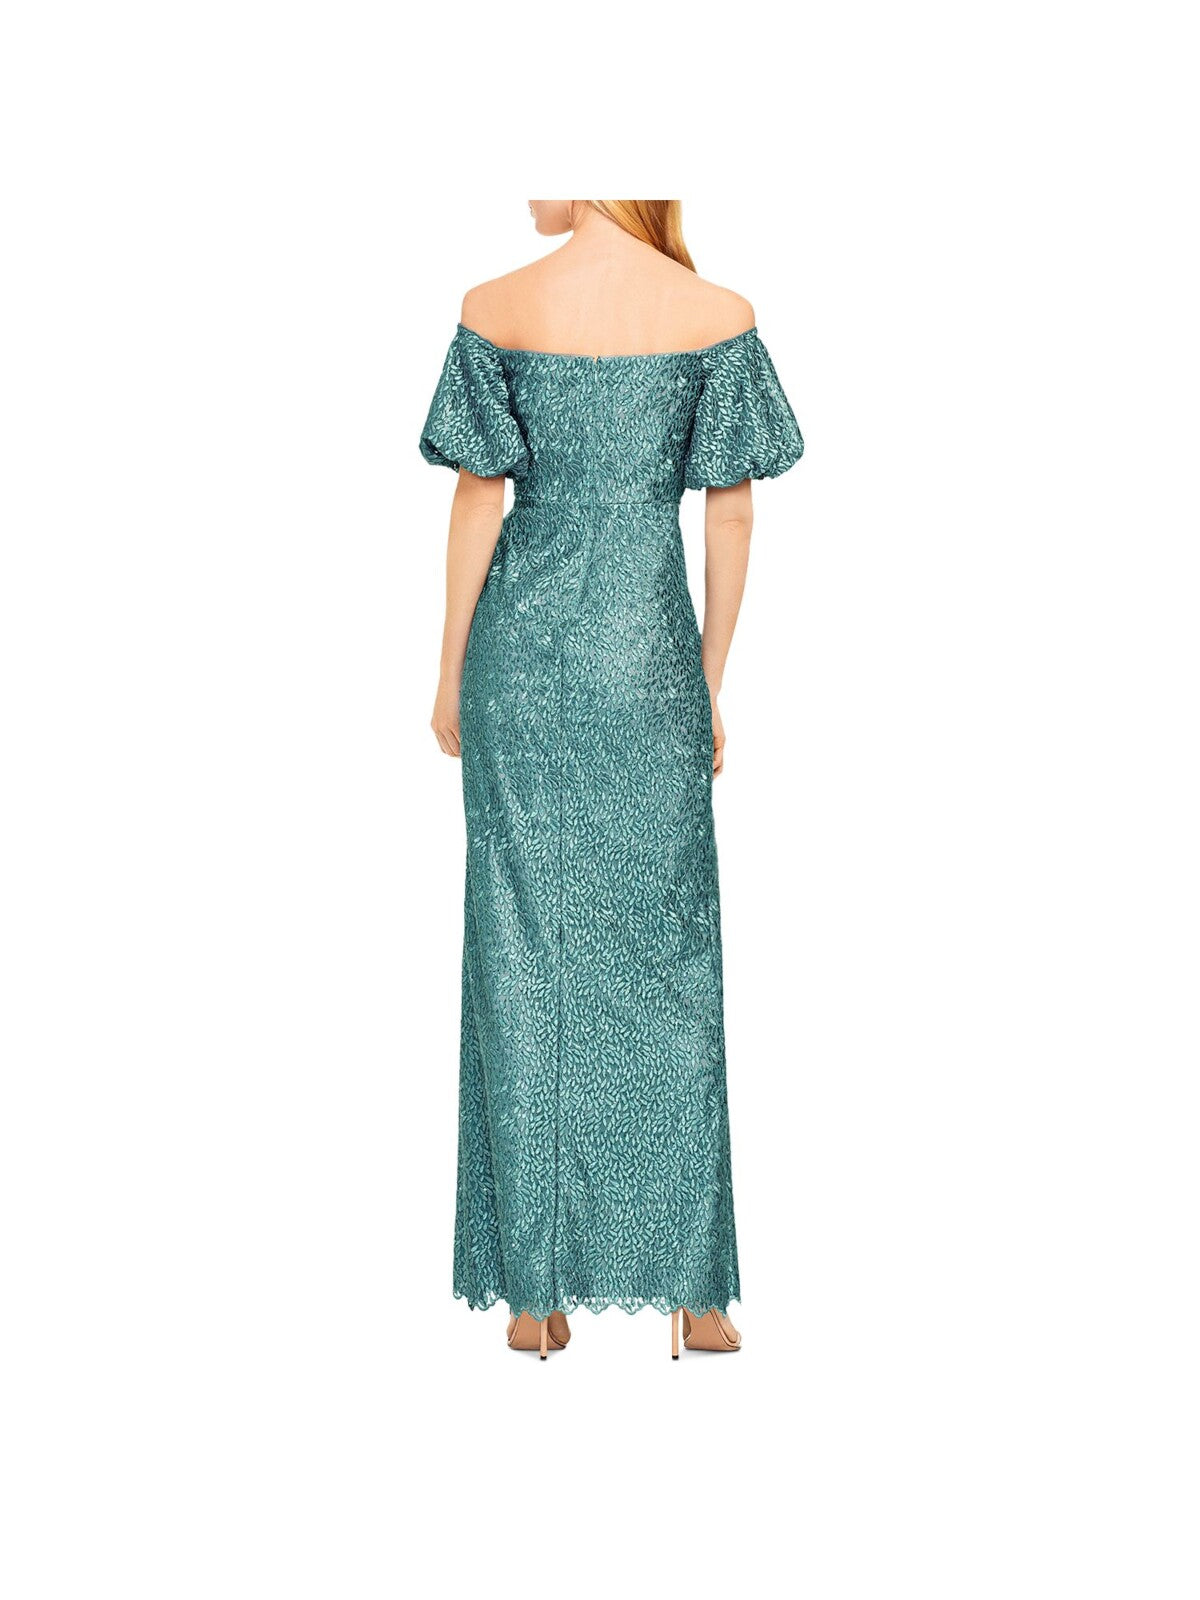 AIDAN MATTOX Womens Teal Lace Embroidered Zippered Slitted Elbow Sleeve Off Shoulder Full-Length Formal Gown Dress 0